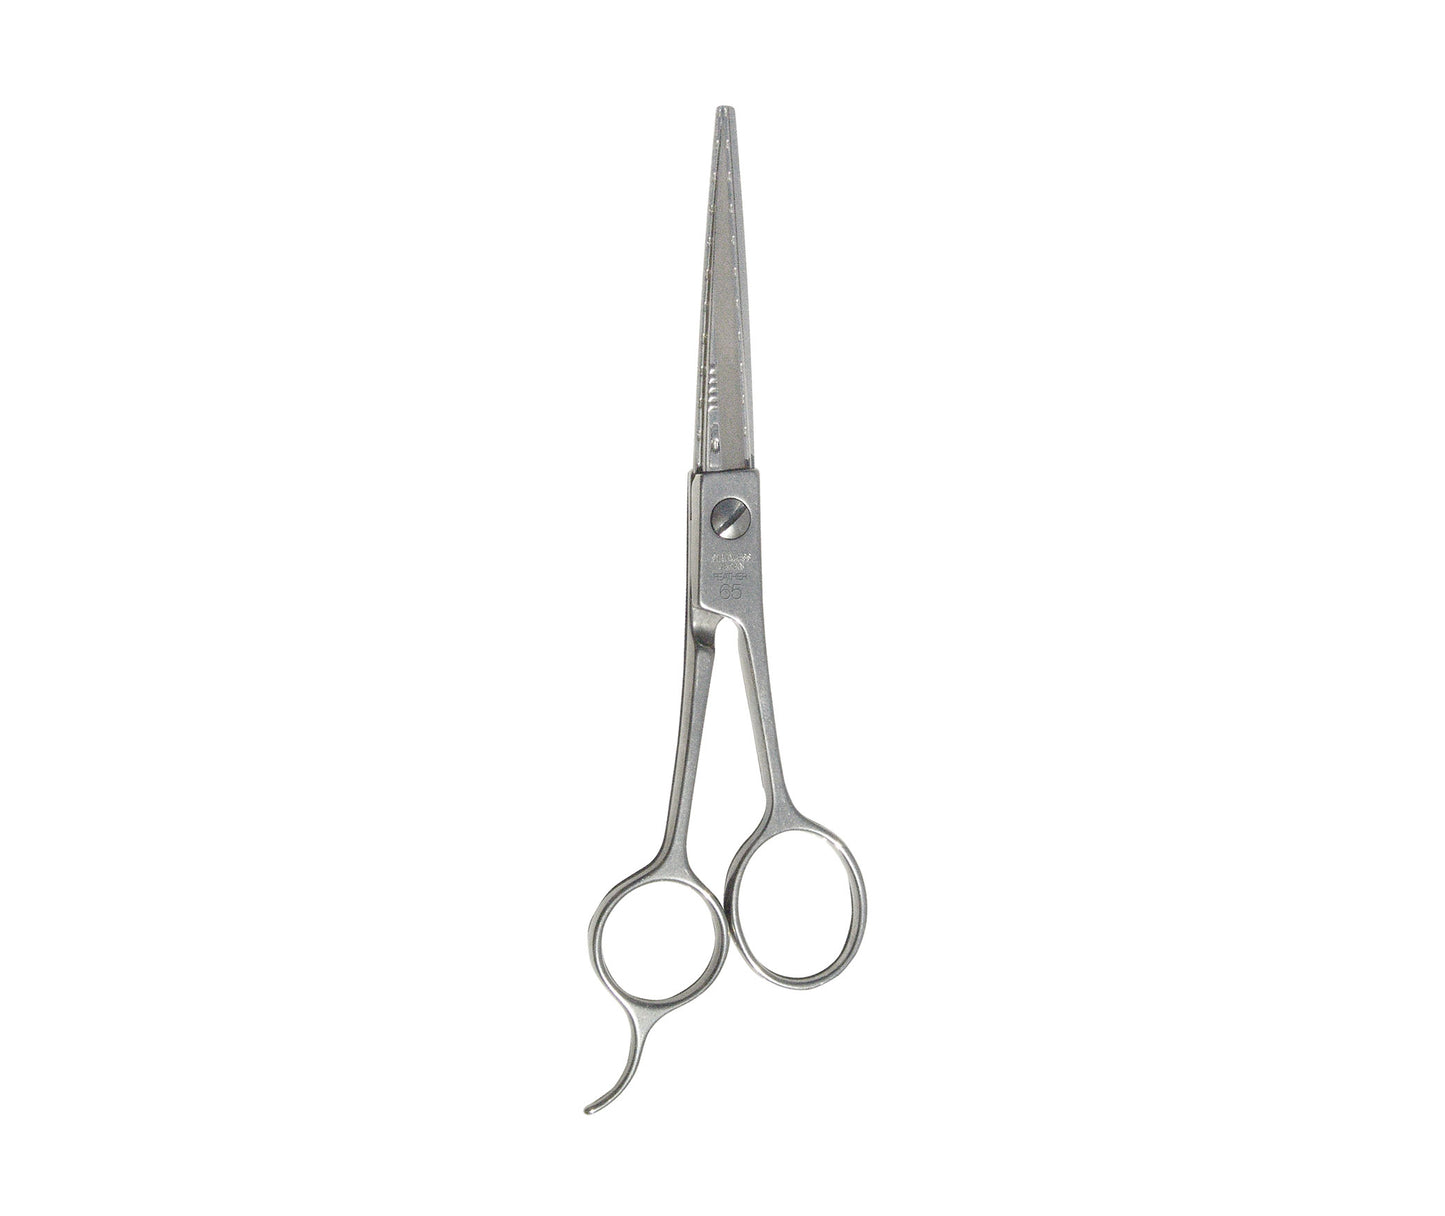 Feather® Switch Blade Shears